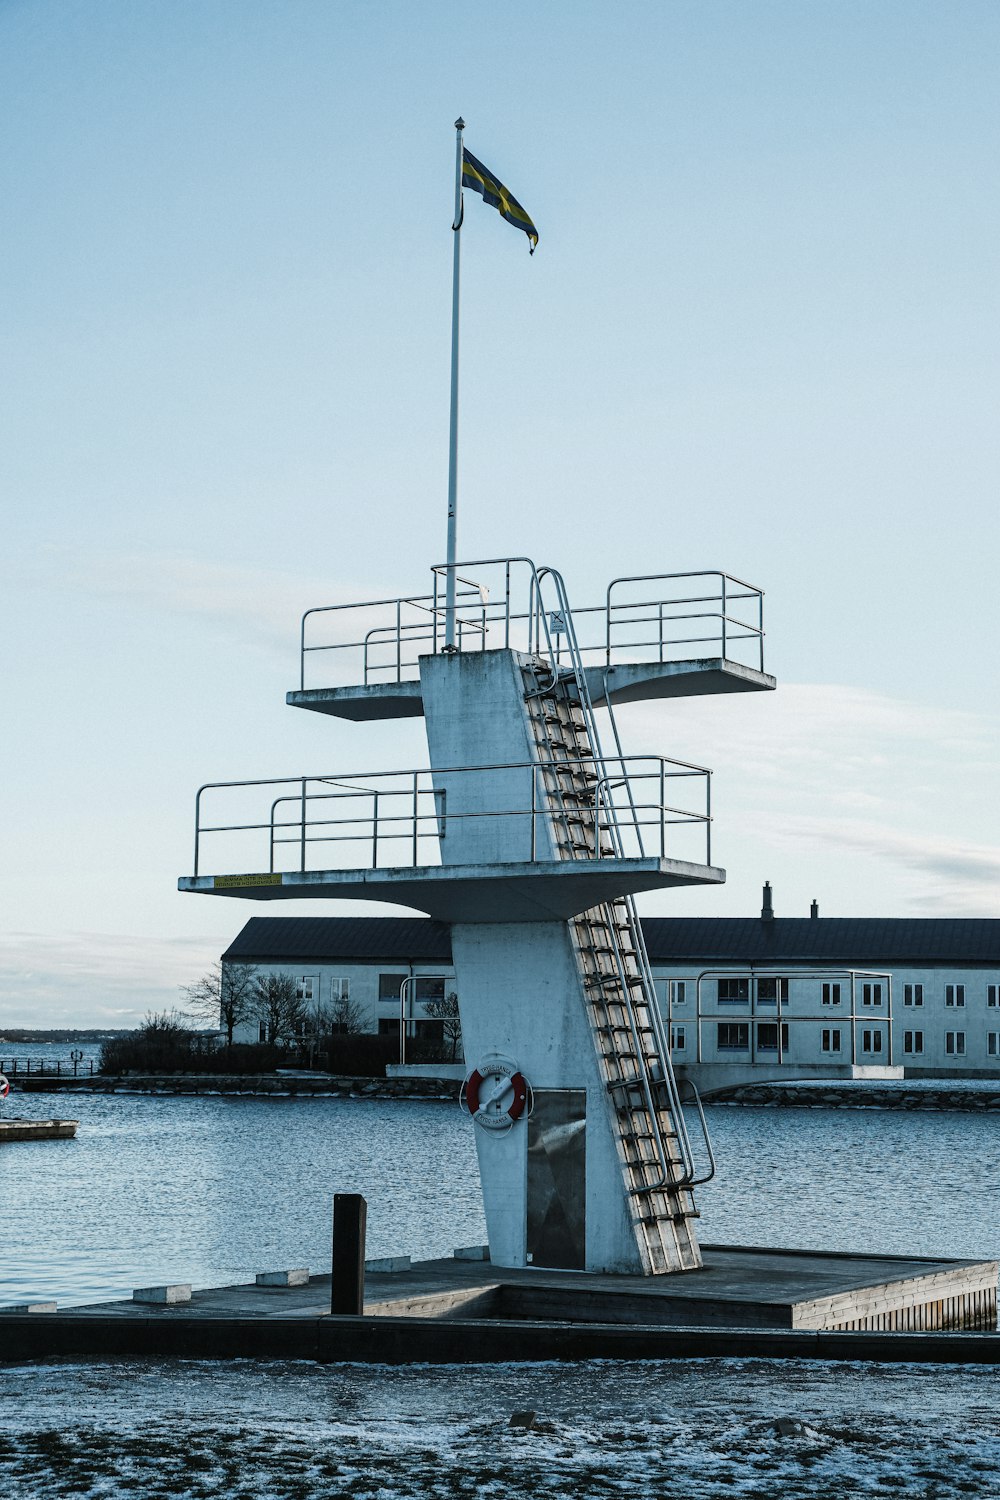 a boat dock with a life guard tower on it